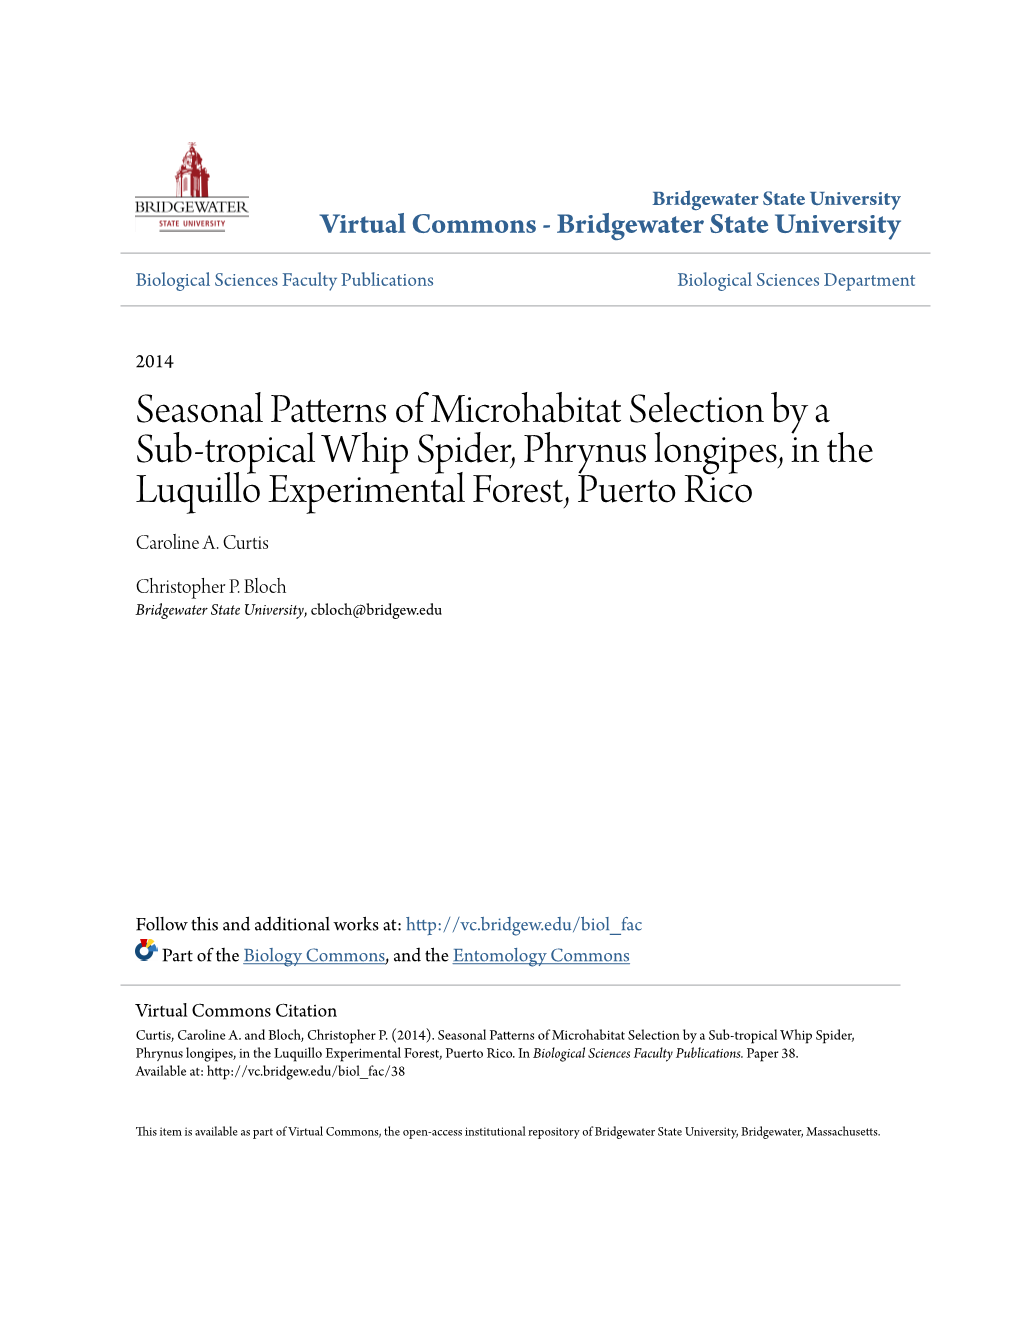 Seasonal Patterns of Microhabitat Selection by a Sub-Tropical Whip Spider, Phrynus Longipes, in the Luquillo Experimental Forest, Puerto Rico Caroline A